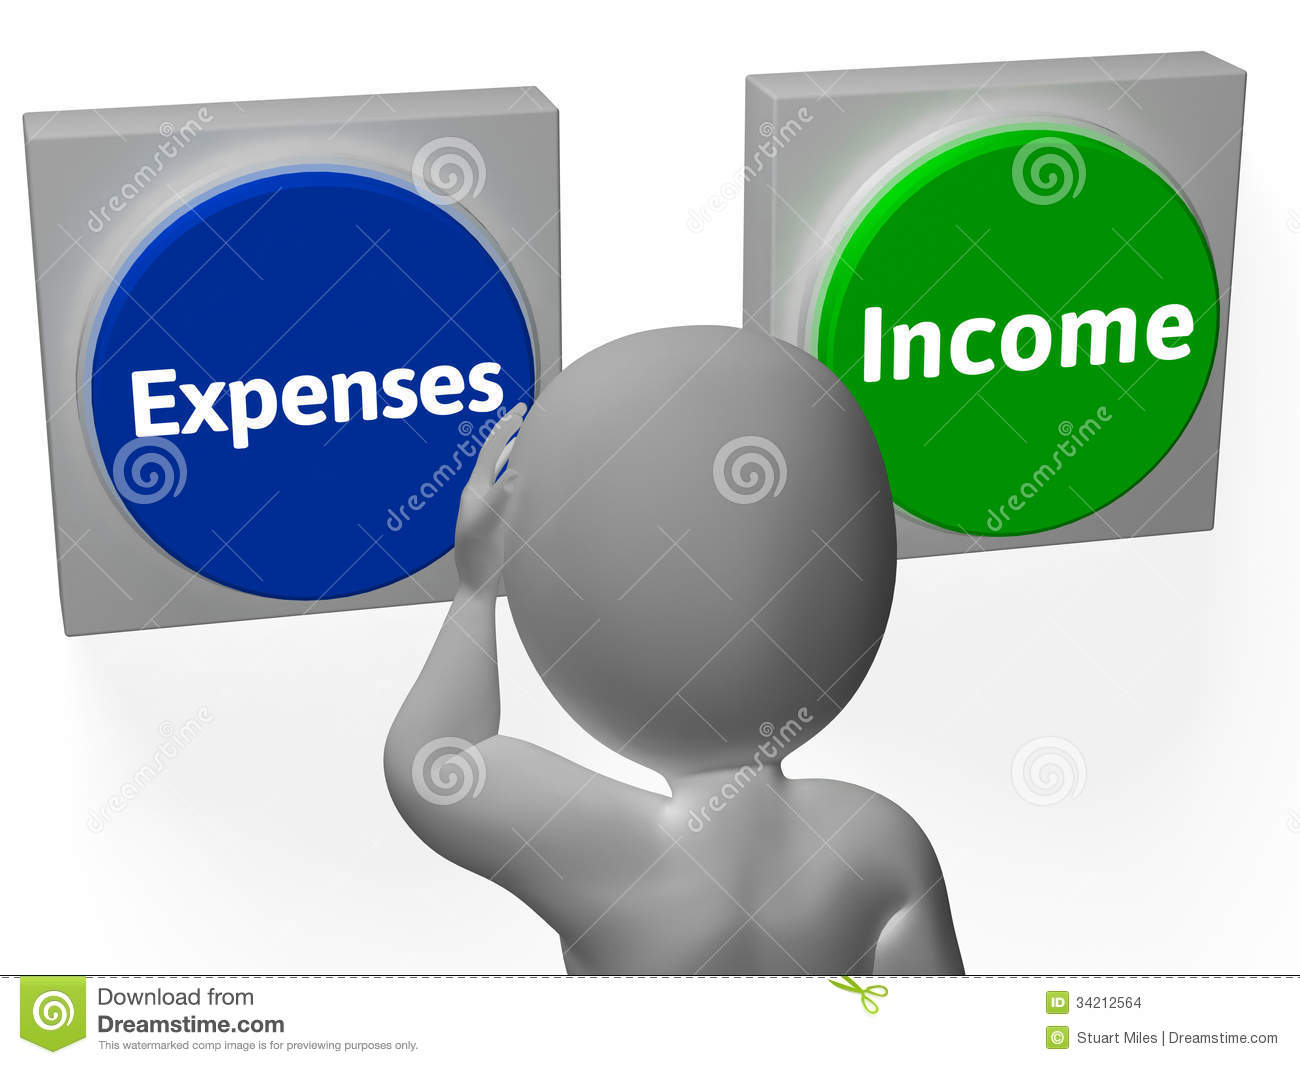 Expenses Income Buttons Show Payments Or Receivables Stock Images